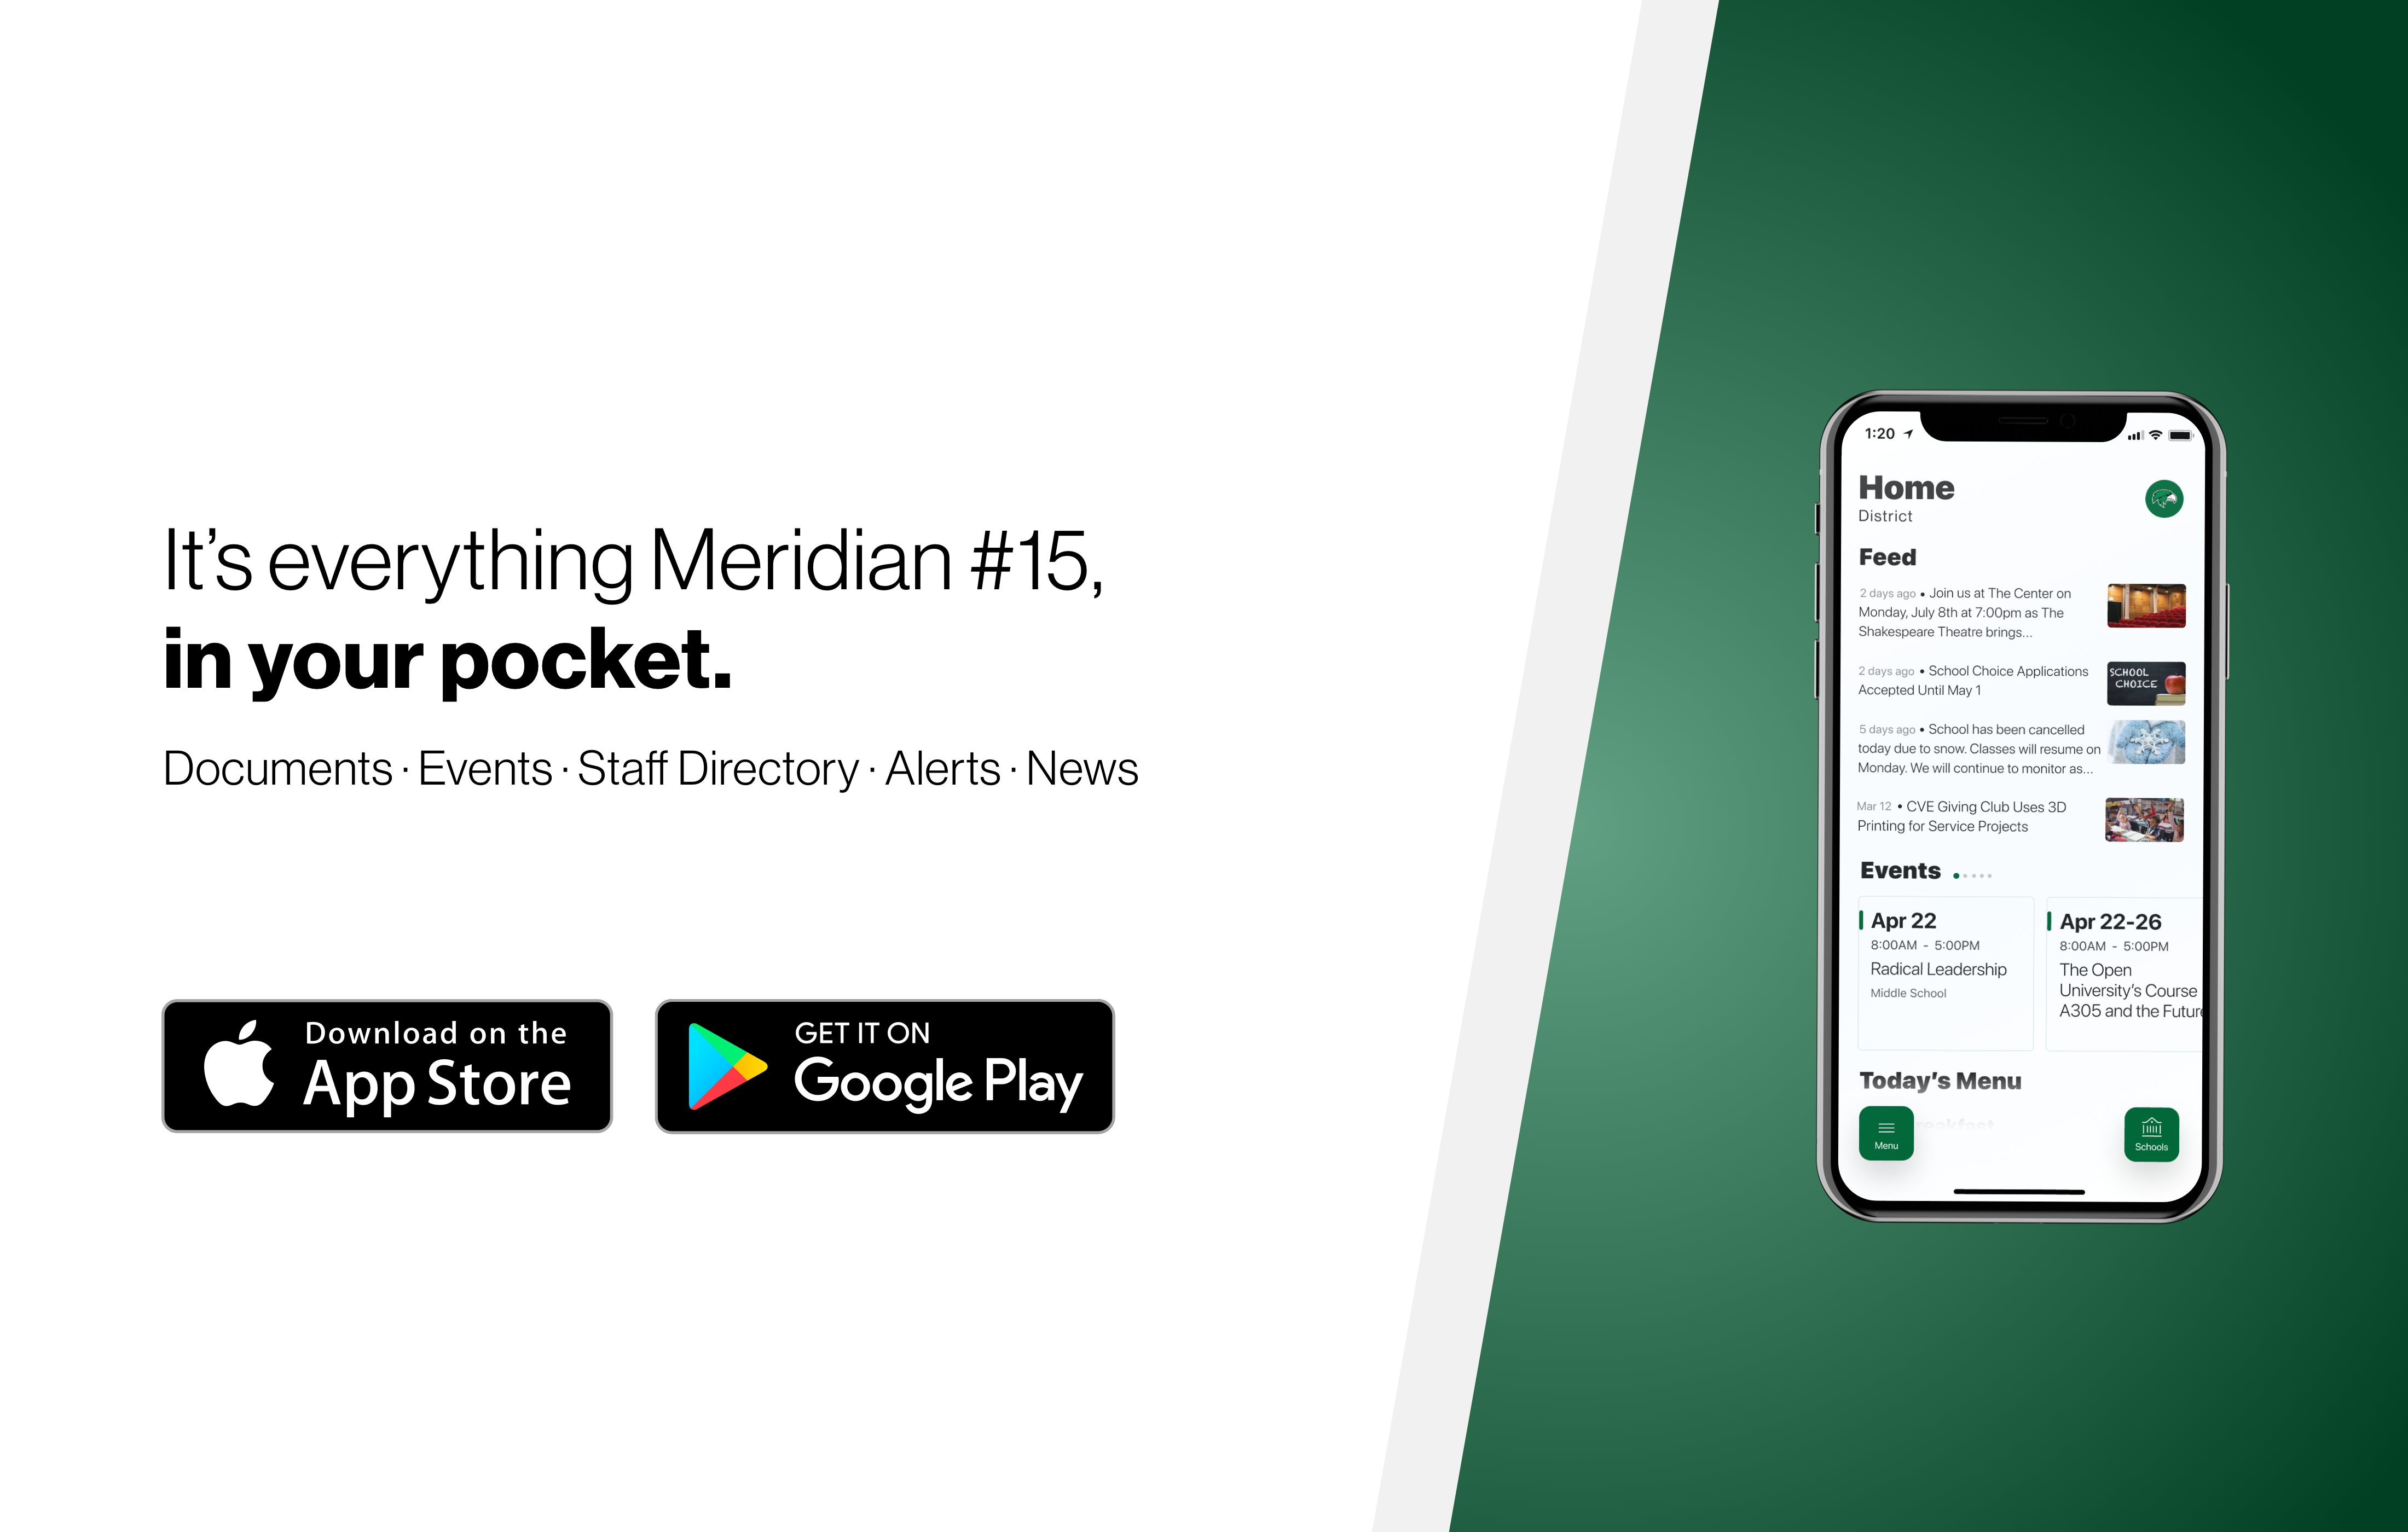 text "It's everything Meridian #15 in your pocket" app dowload options